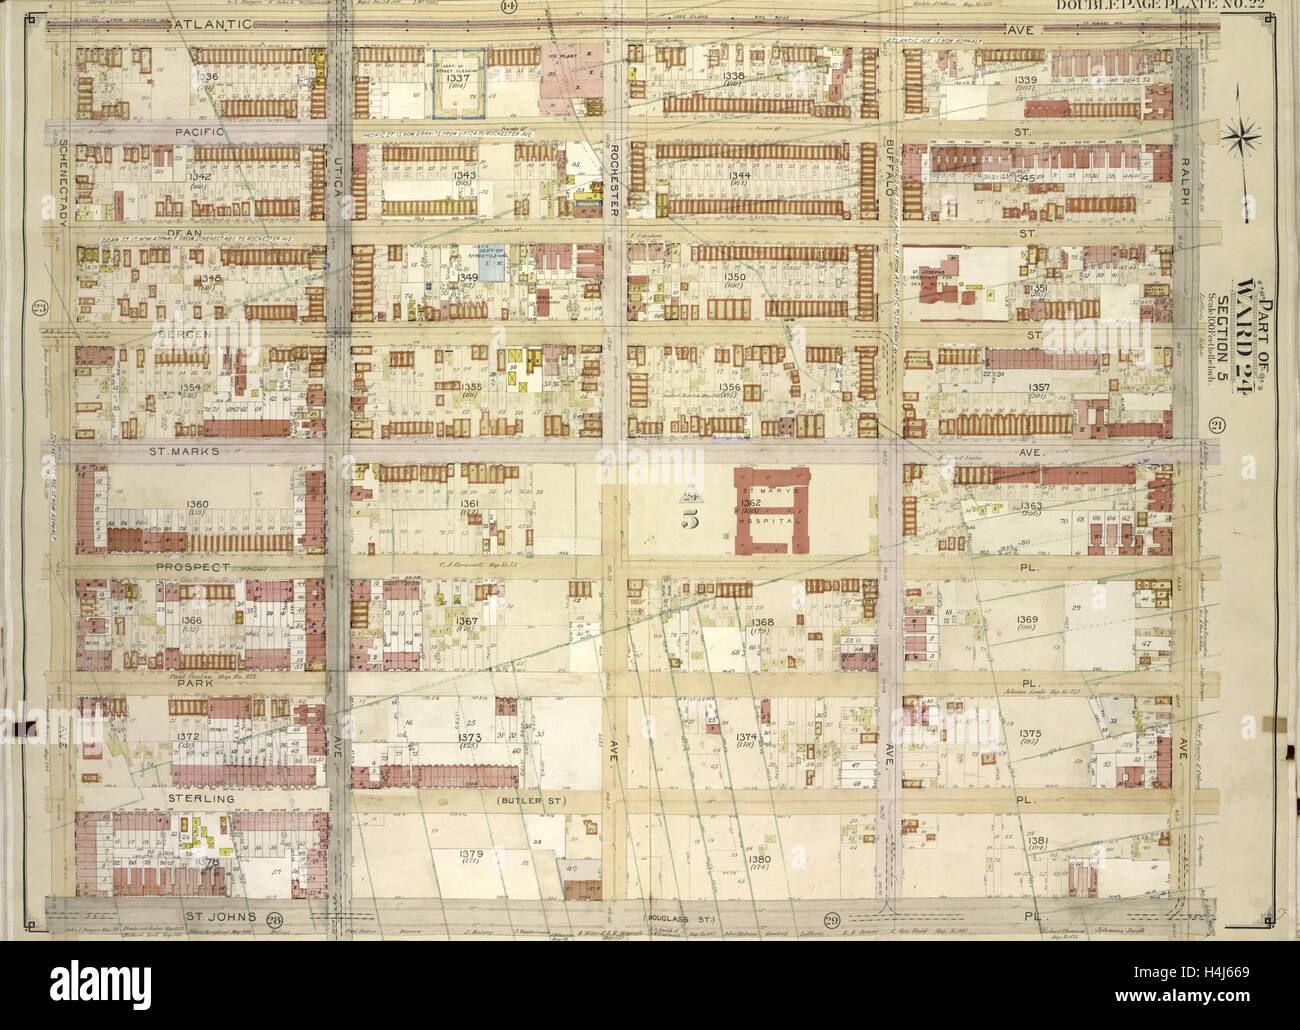 Brooklyn, Vol. 2, Double Page Plate No. 22; Part of Ward 24, Section 5; Map bounded by Atlantic Ave.; IncludingRalph Ave. Stock Photo